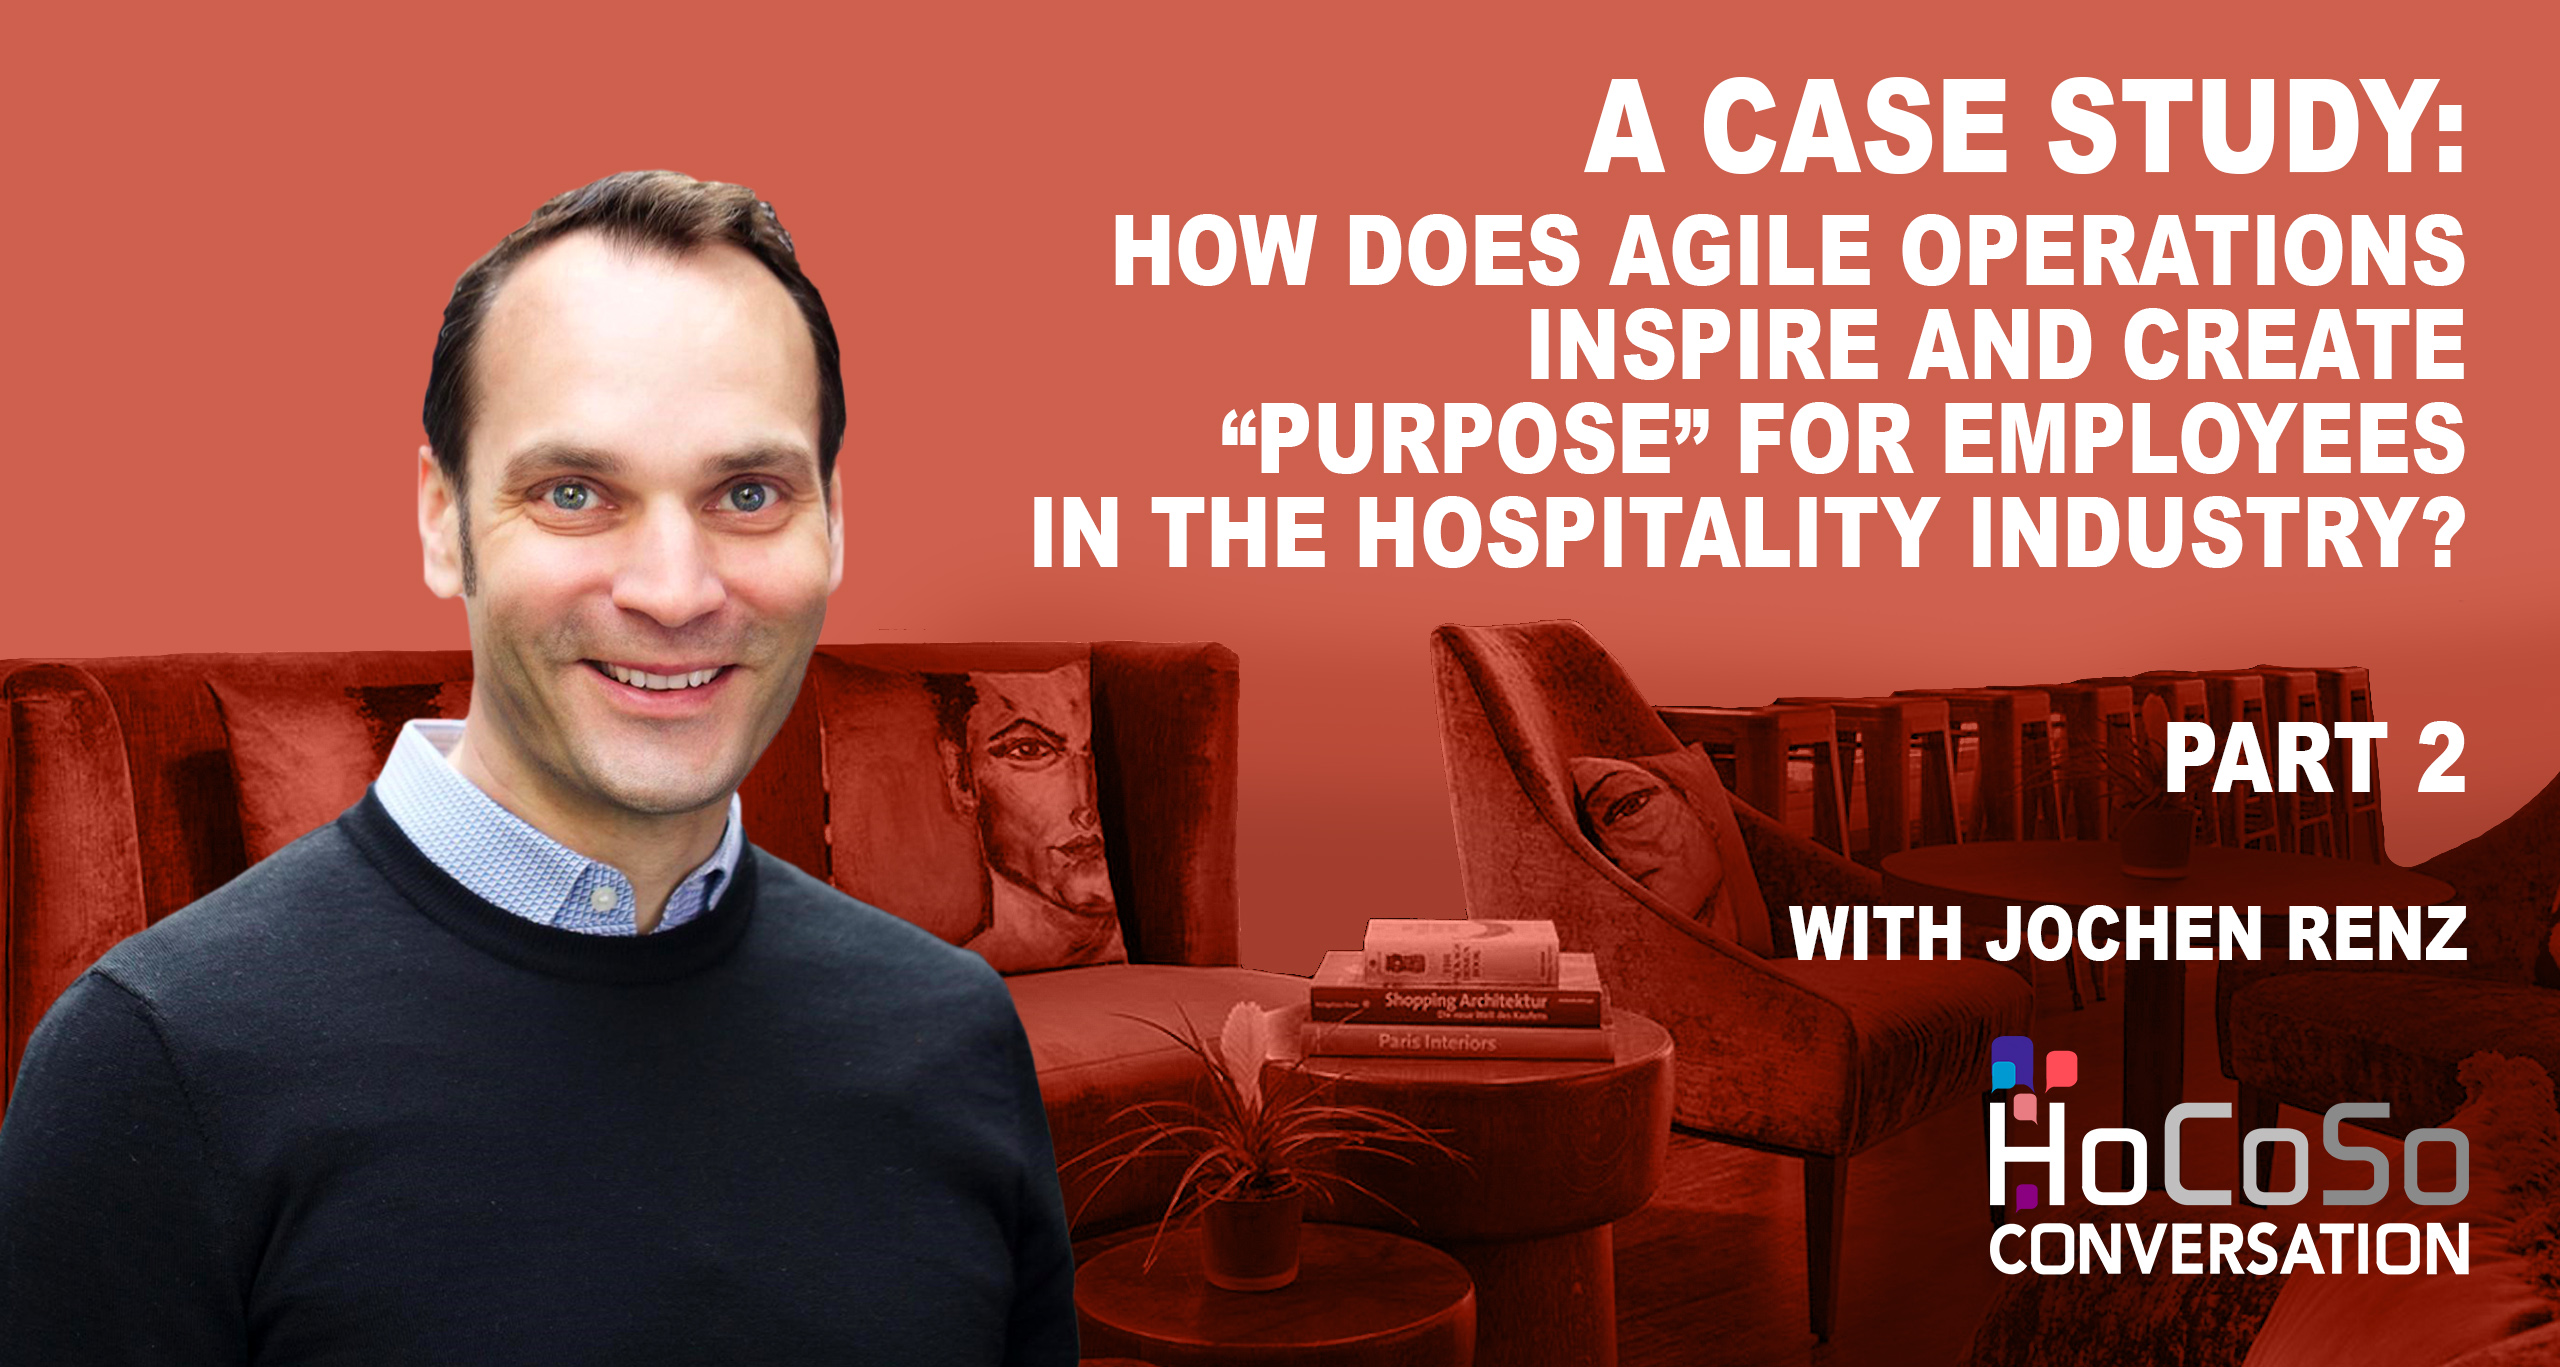 How does agile operations inspire and create purpose for employees in the hospitality industry - a case study for HoCoSo CONVERSATION with Jochen Renz